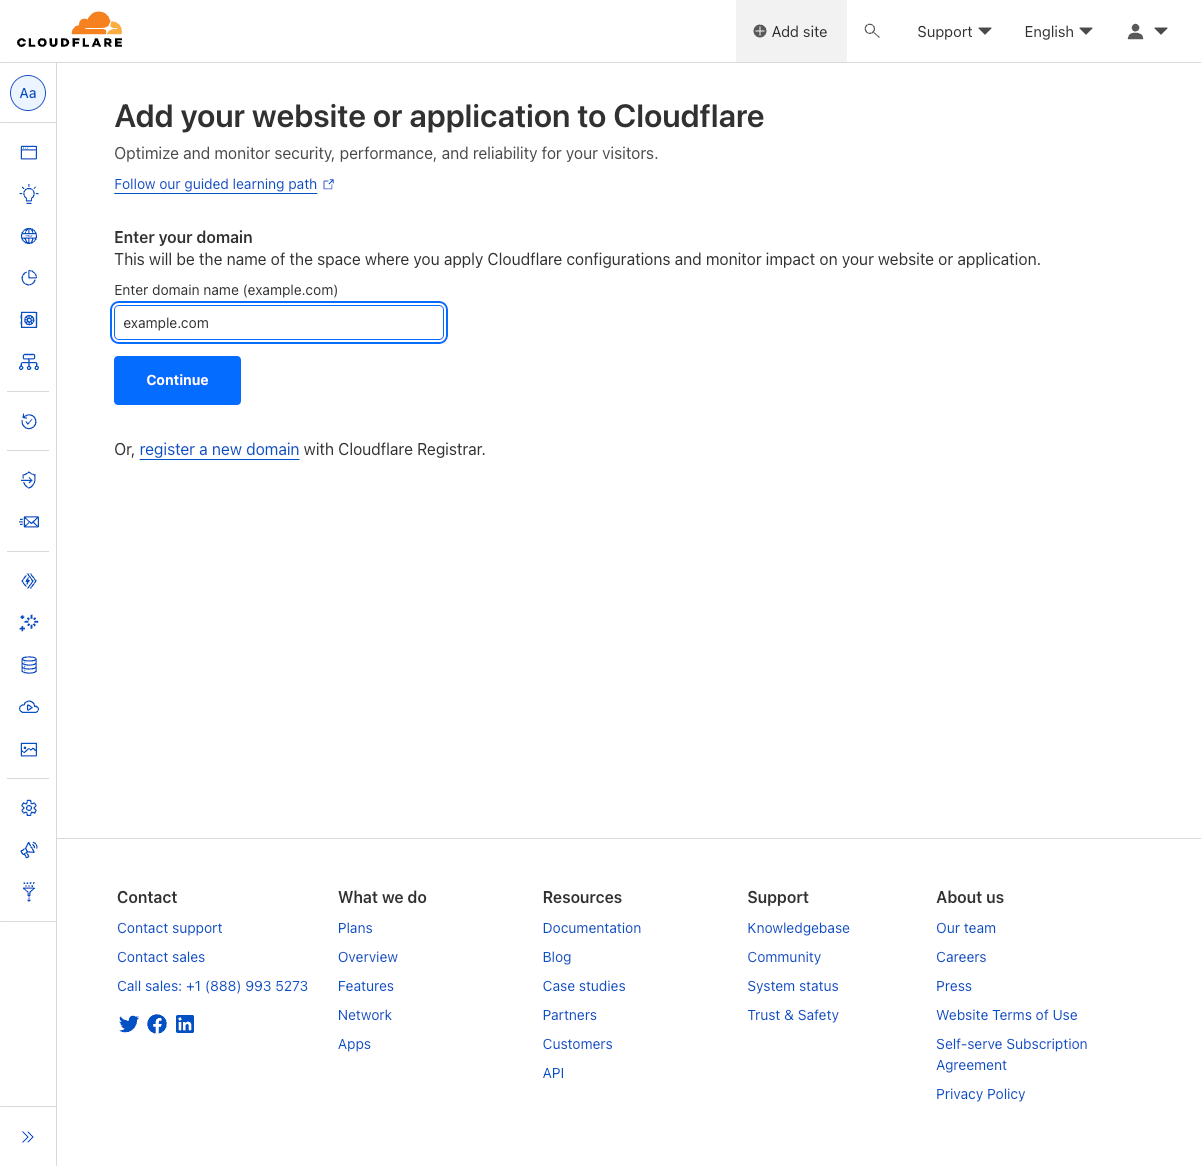 Screenshot of adding a site to Cloudflare in the WordPress Cloudflare plugin setup